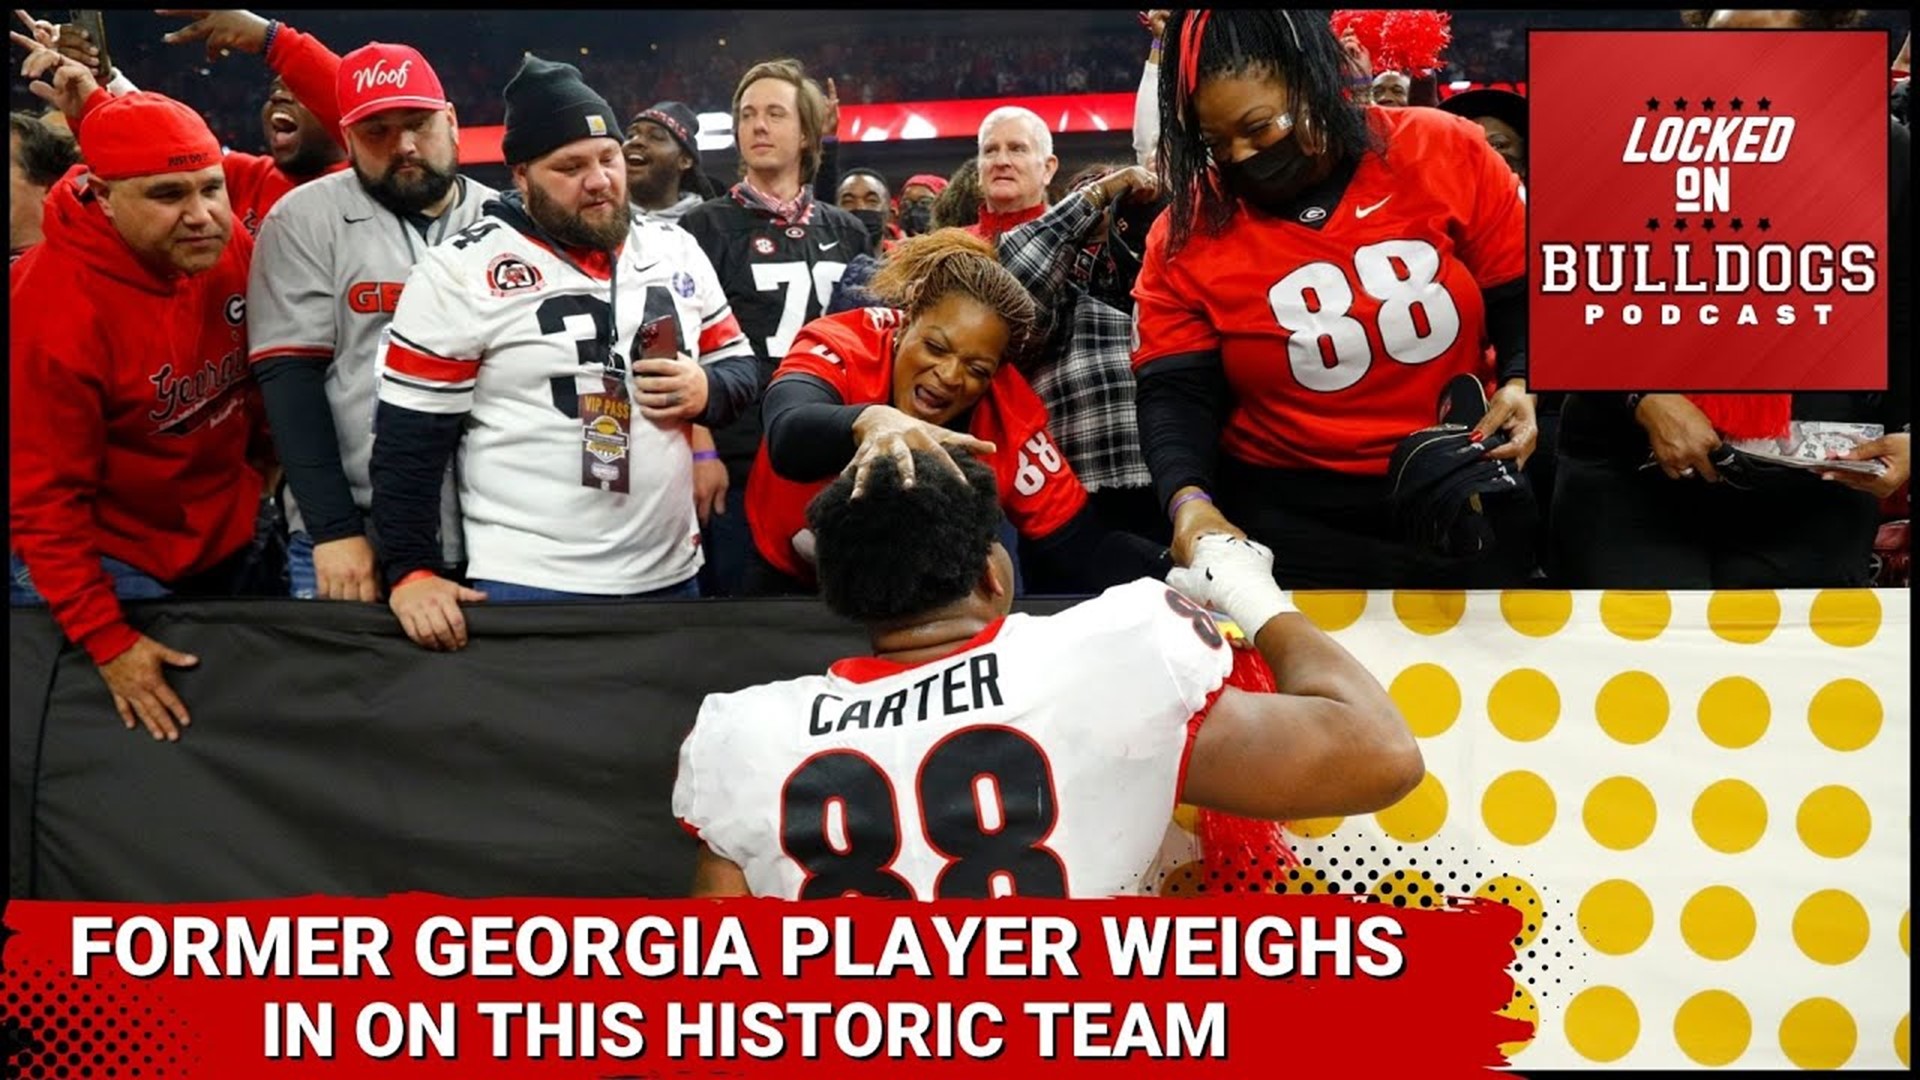 Living in the Good Ole Days of UGA football! How does this team compare with others we have seen